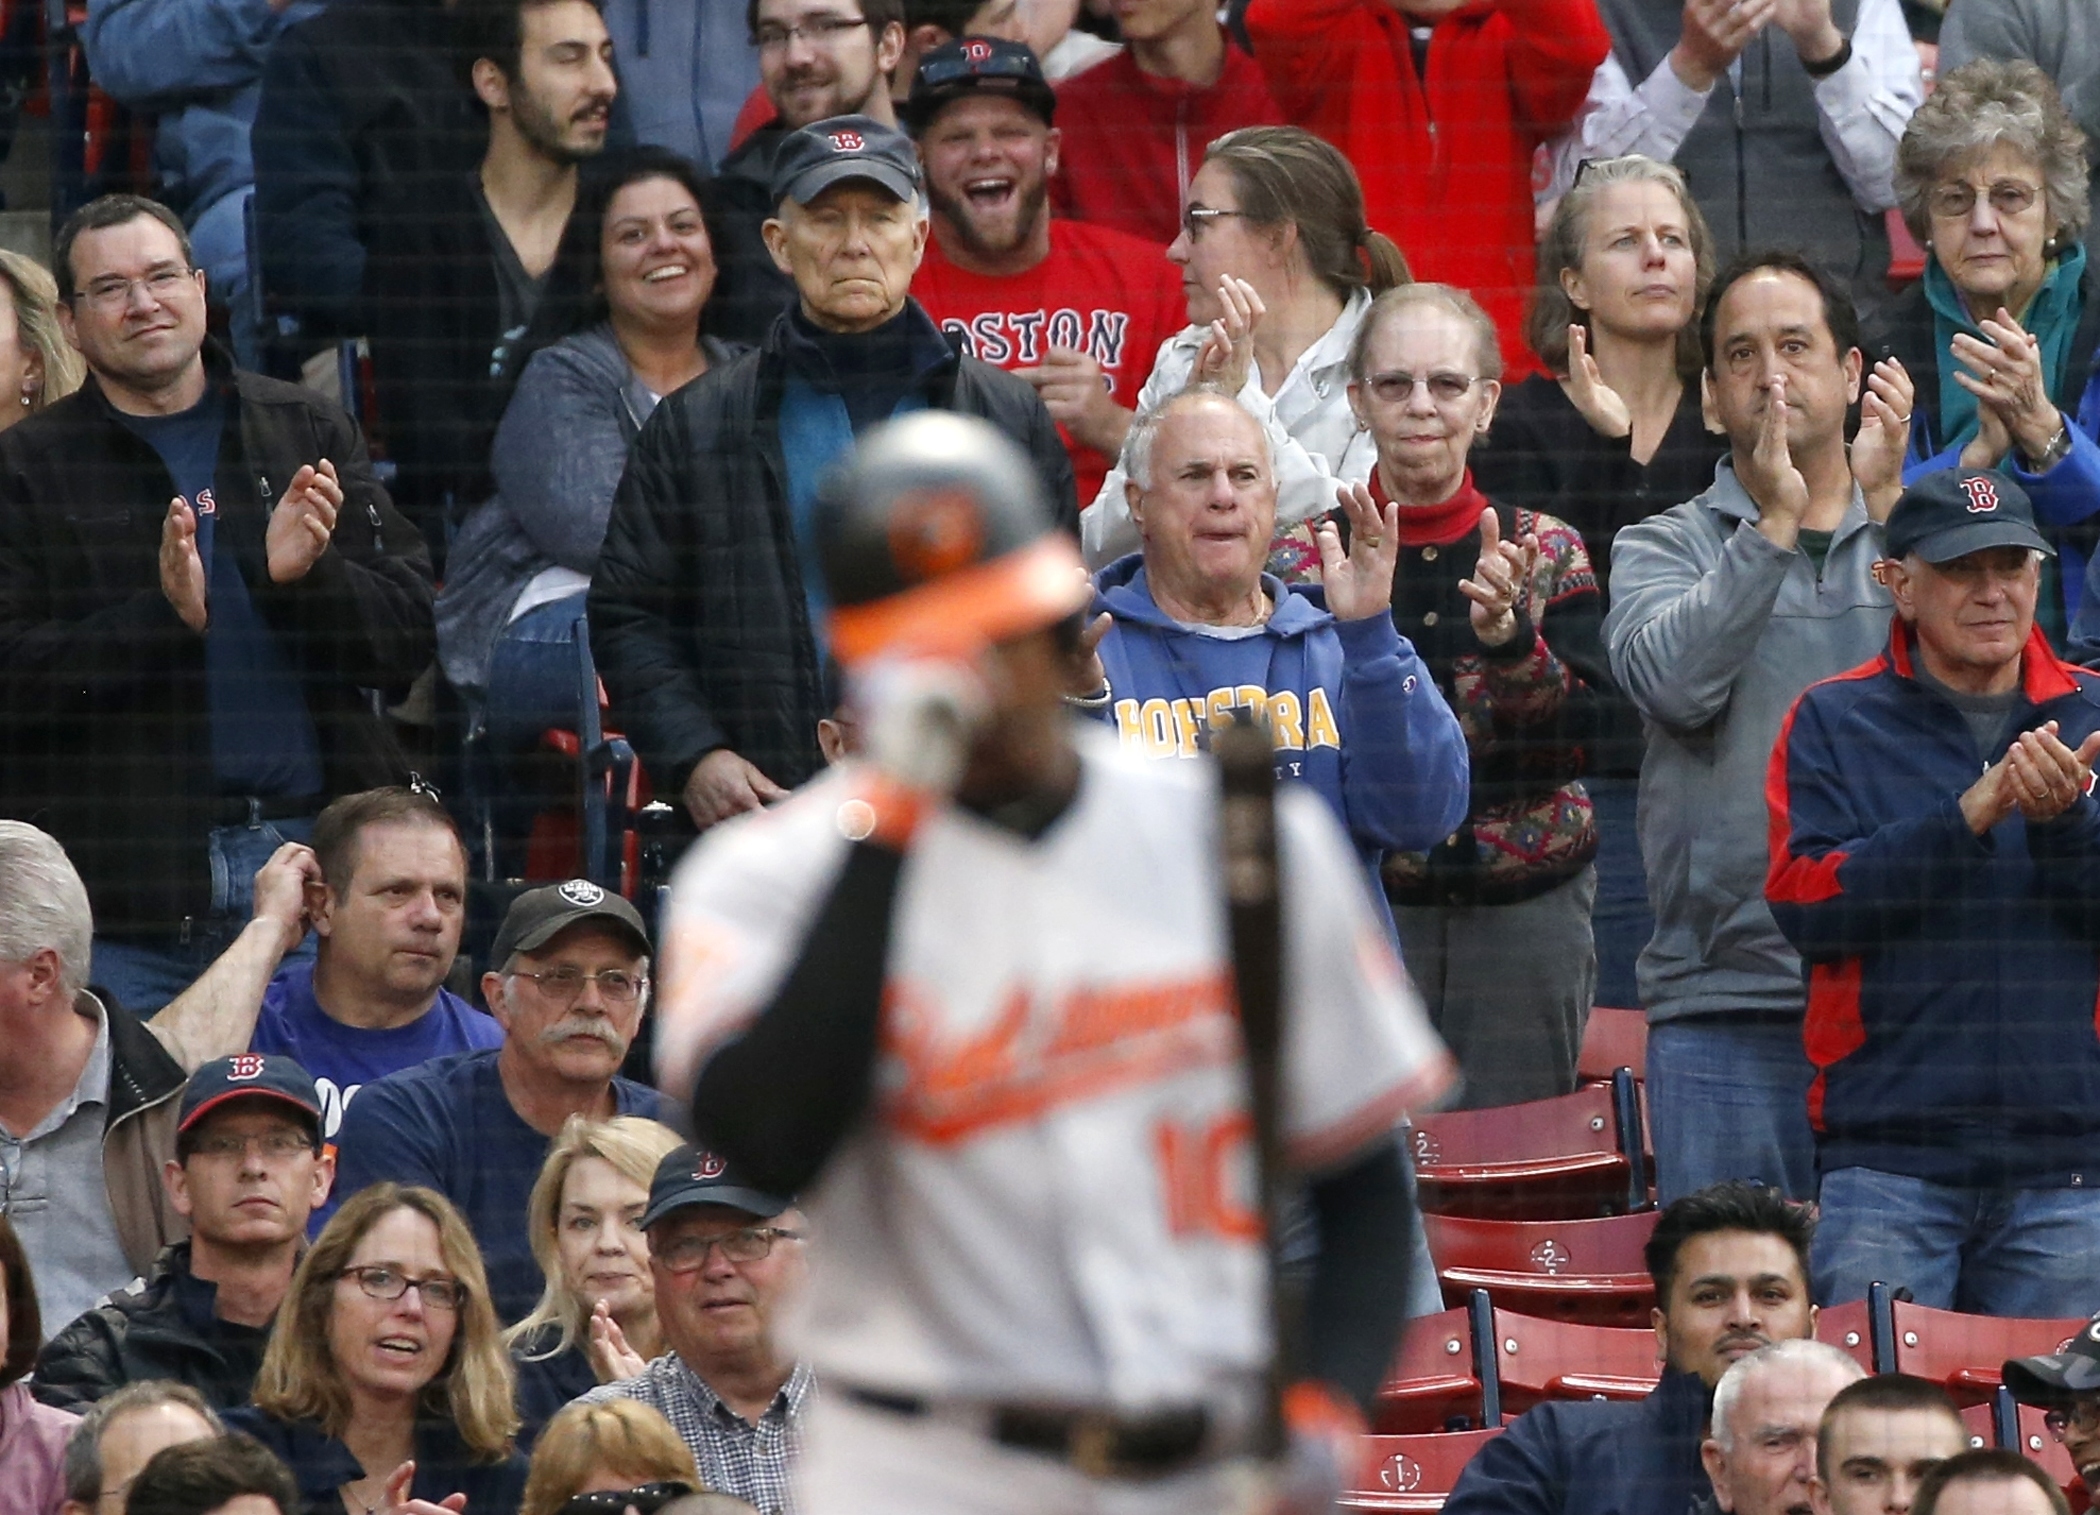 Fans give a standing ovation as Baltimore Orioles' Adam Jones comes to bat during the first inning of a baseball game, Tuesday against the Boston Red Sox, May 2, 2017, in Boston. (AP Photo/Michael Dwyer)